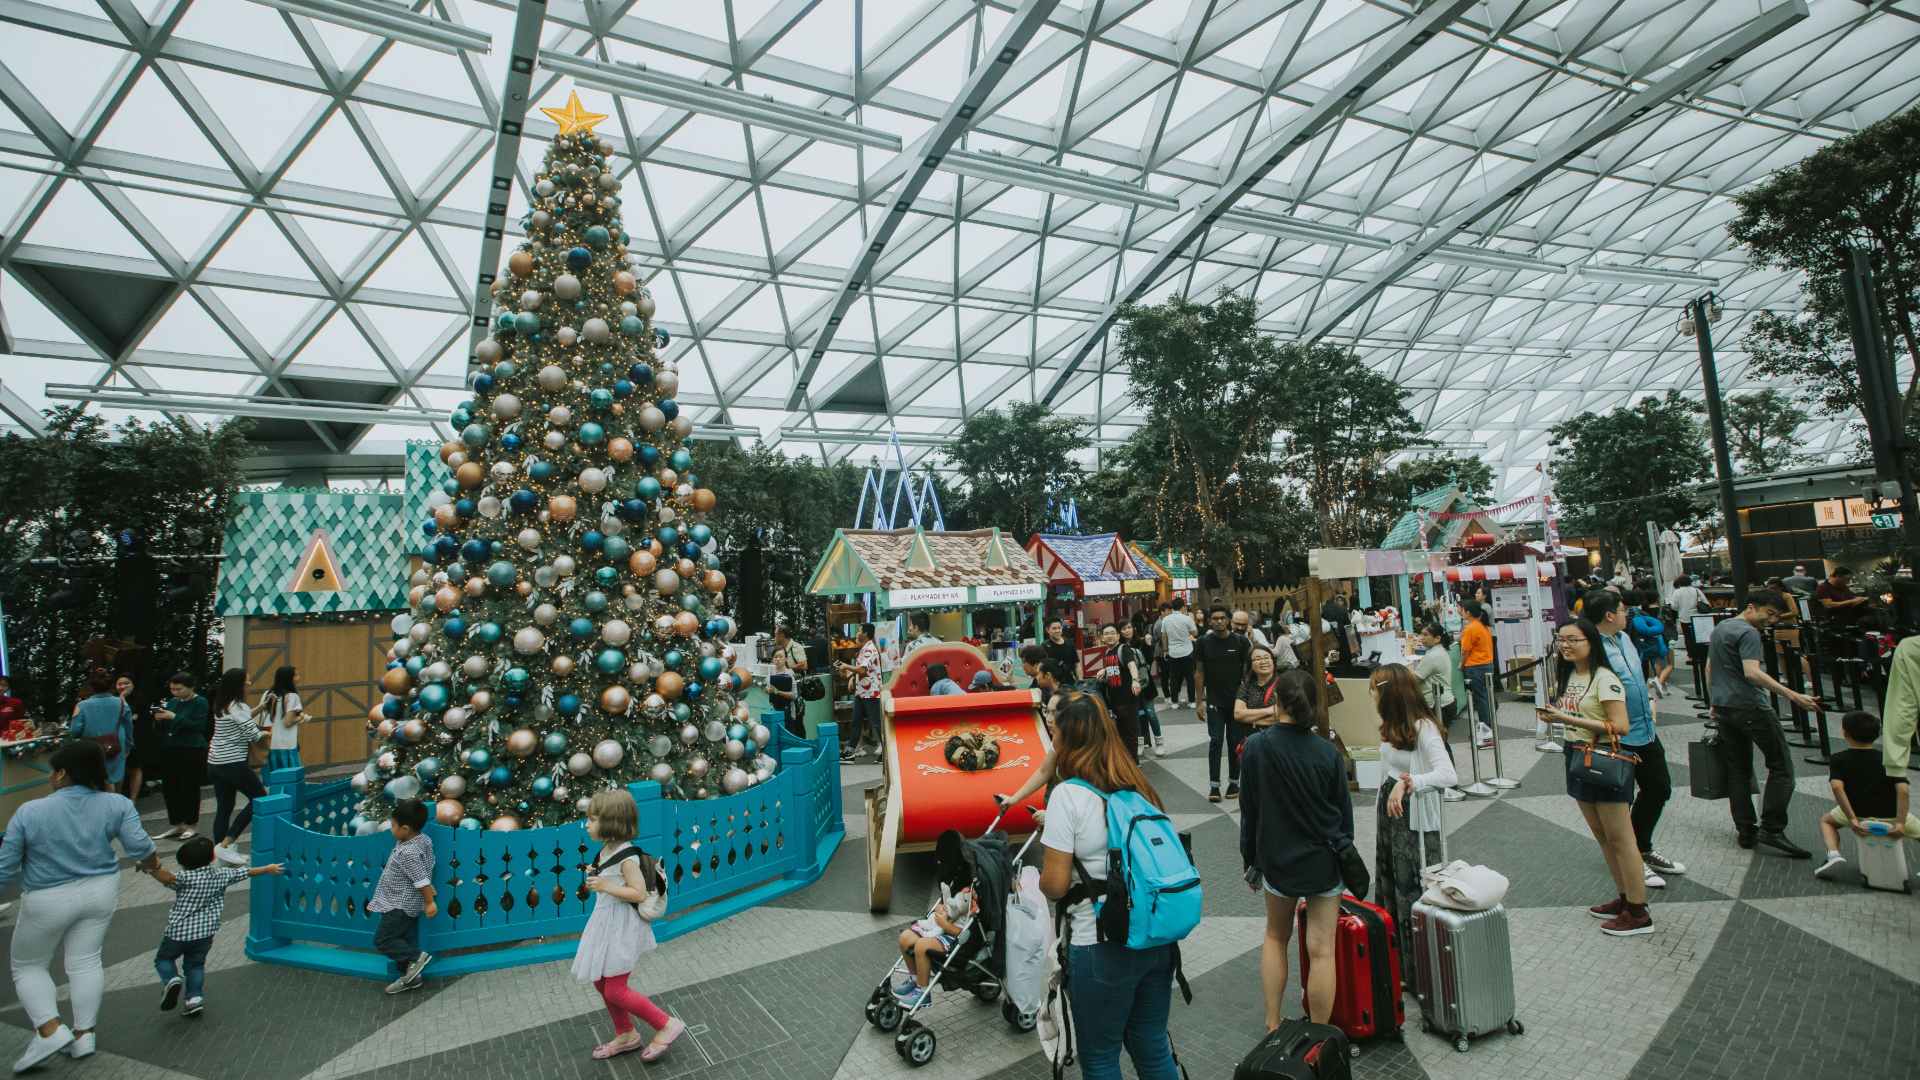 A Snow-Filled Winter Wonderland Has Descended on Singapore's Changi Airport